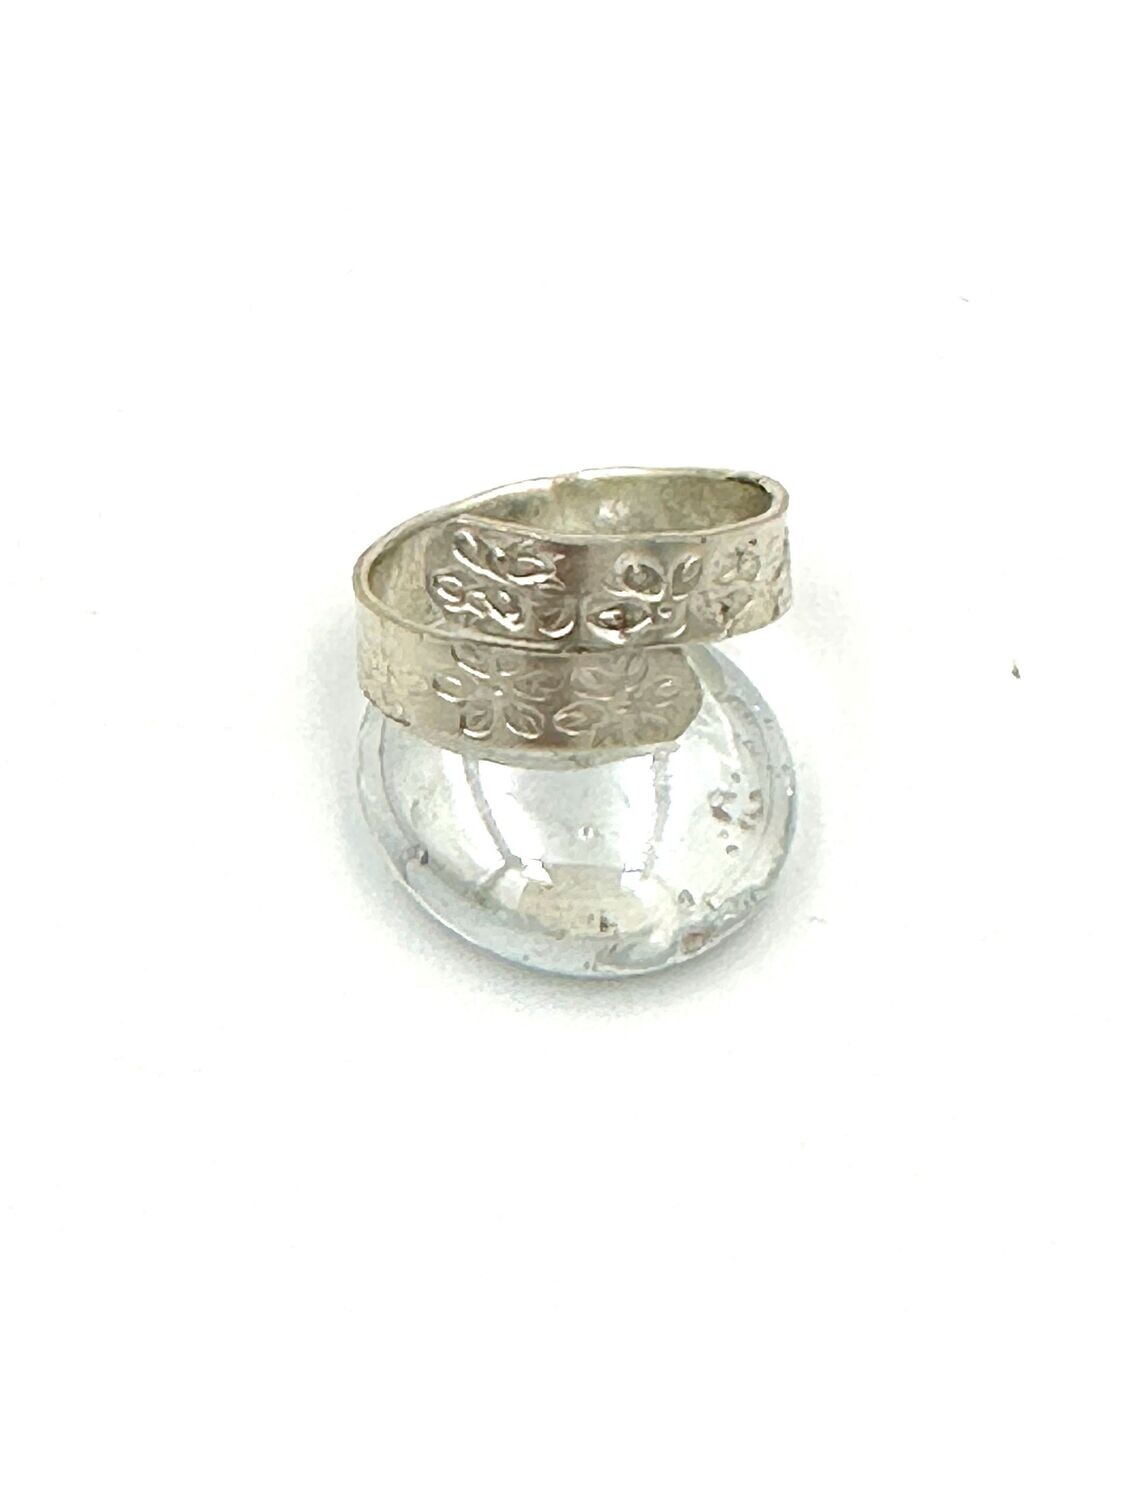 Flower stamped 'miss' ring